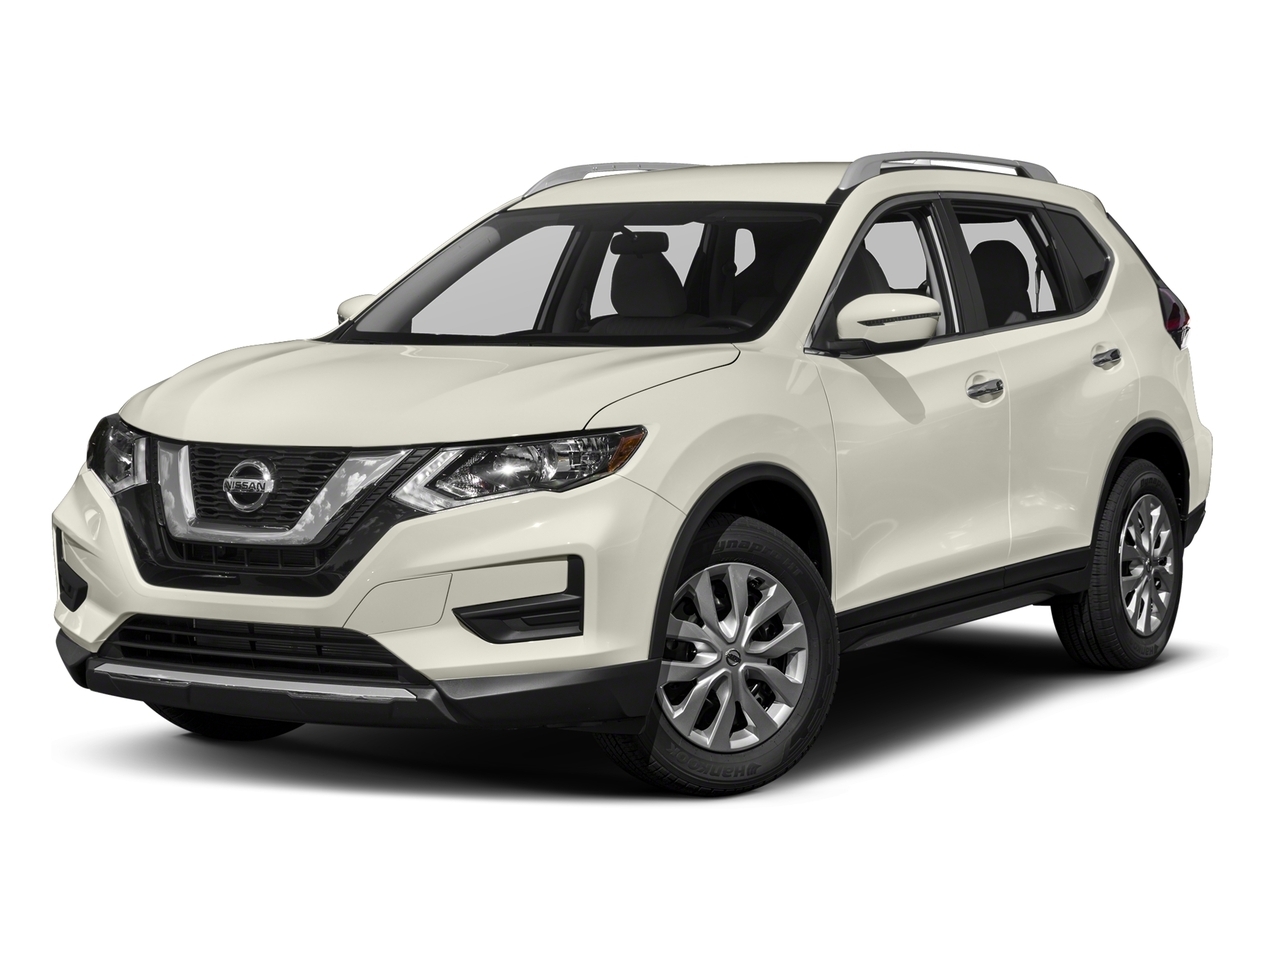 2017 Nissan Rogue AWD S | 2 Sets of Wheels Included!